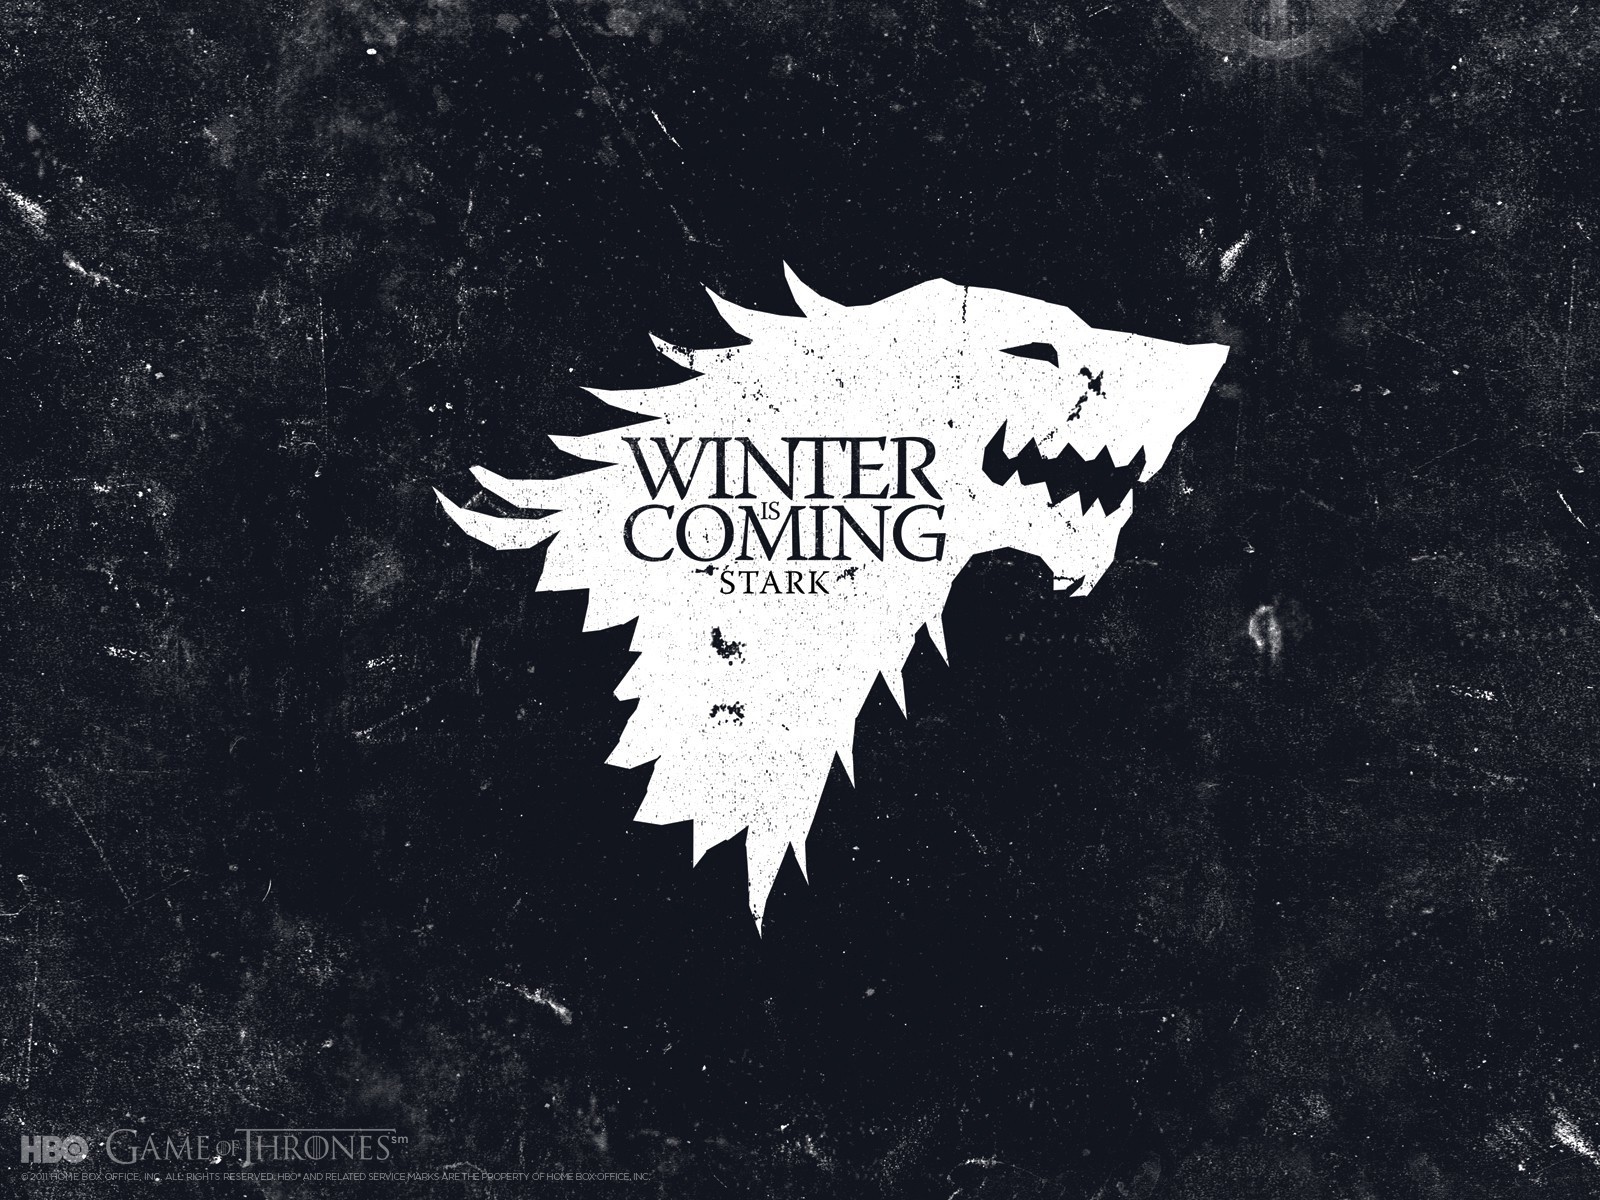 General 1600x1200 sigils Game of Thrones House Stark Winter Is Coming TV series HBO